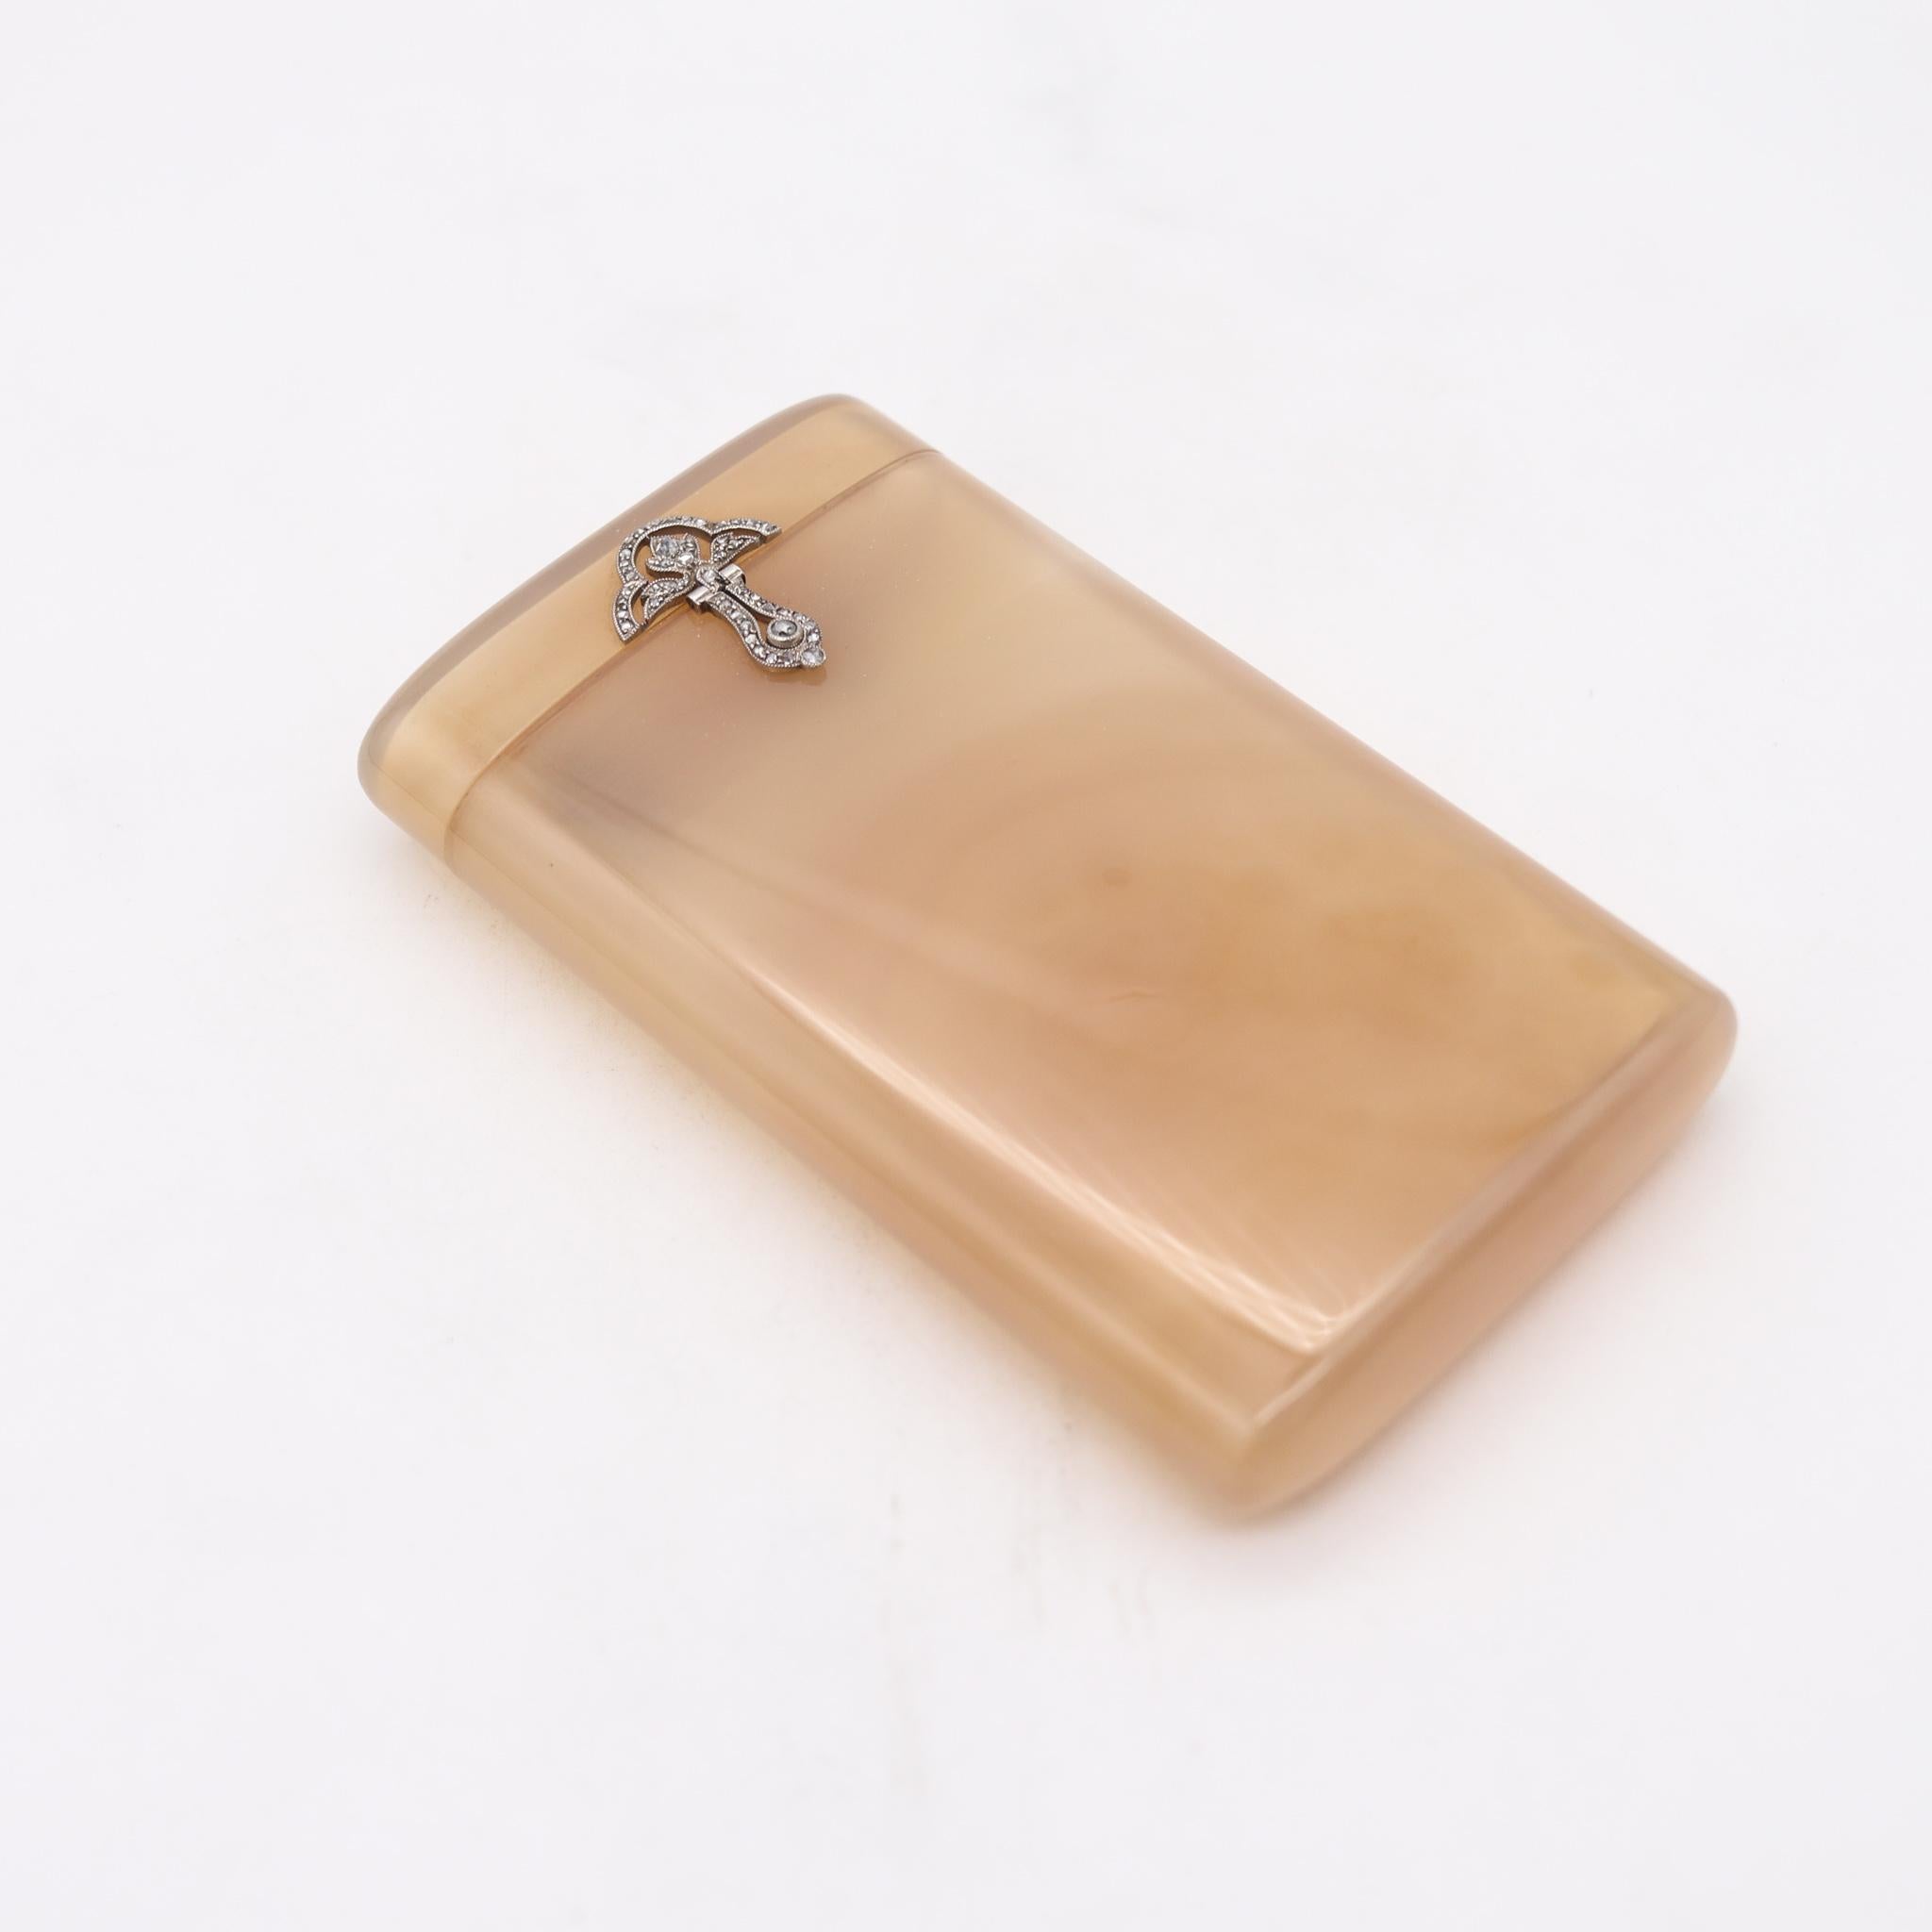 Cards case designed by Ghiso Paris.

Gorgeous piece, created in the art deco style in Paris France by the luxury makers and jewelry house of Ghiso, back in the 1920. It was carved with impeccable precision from one single piece of translucent